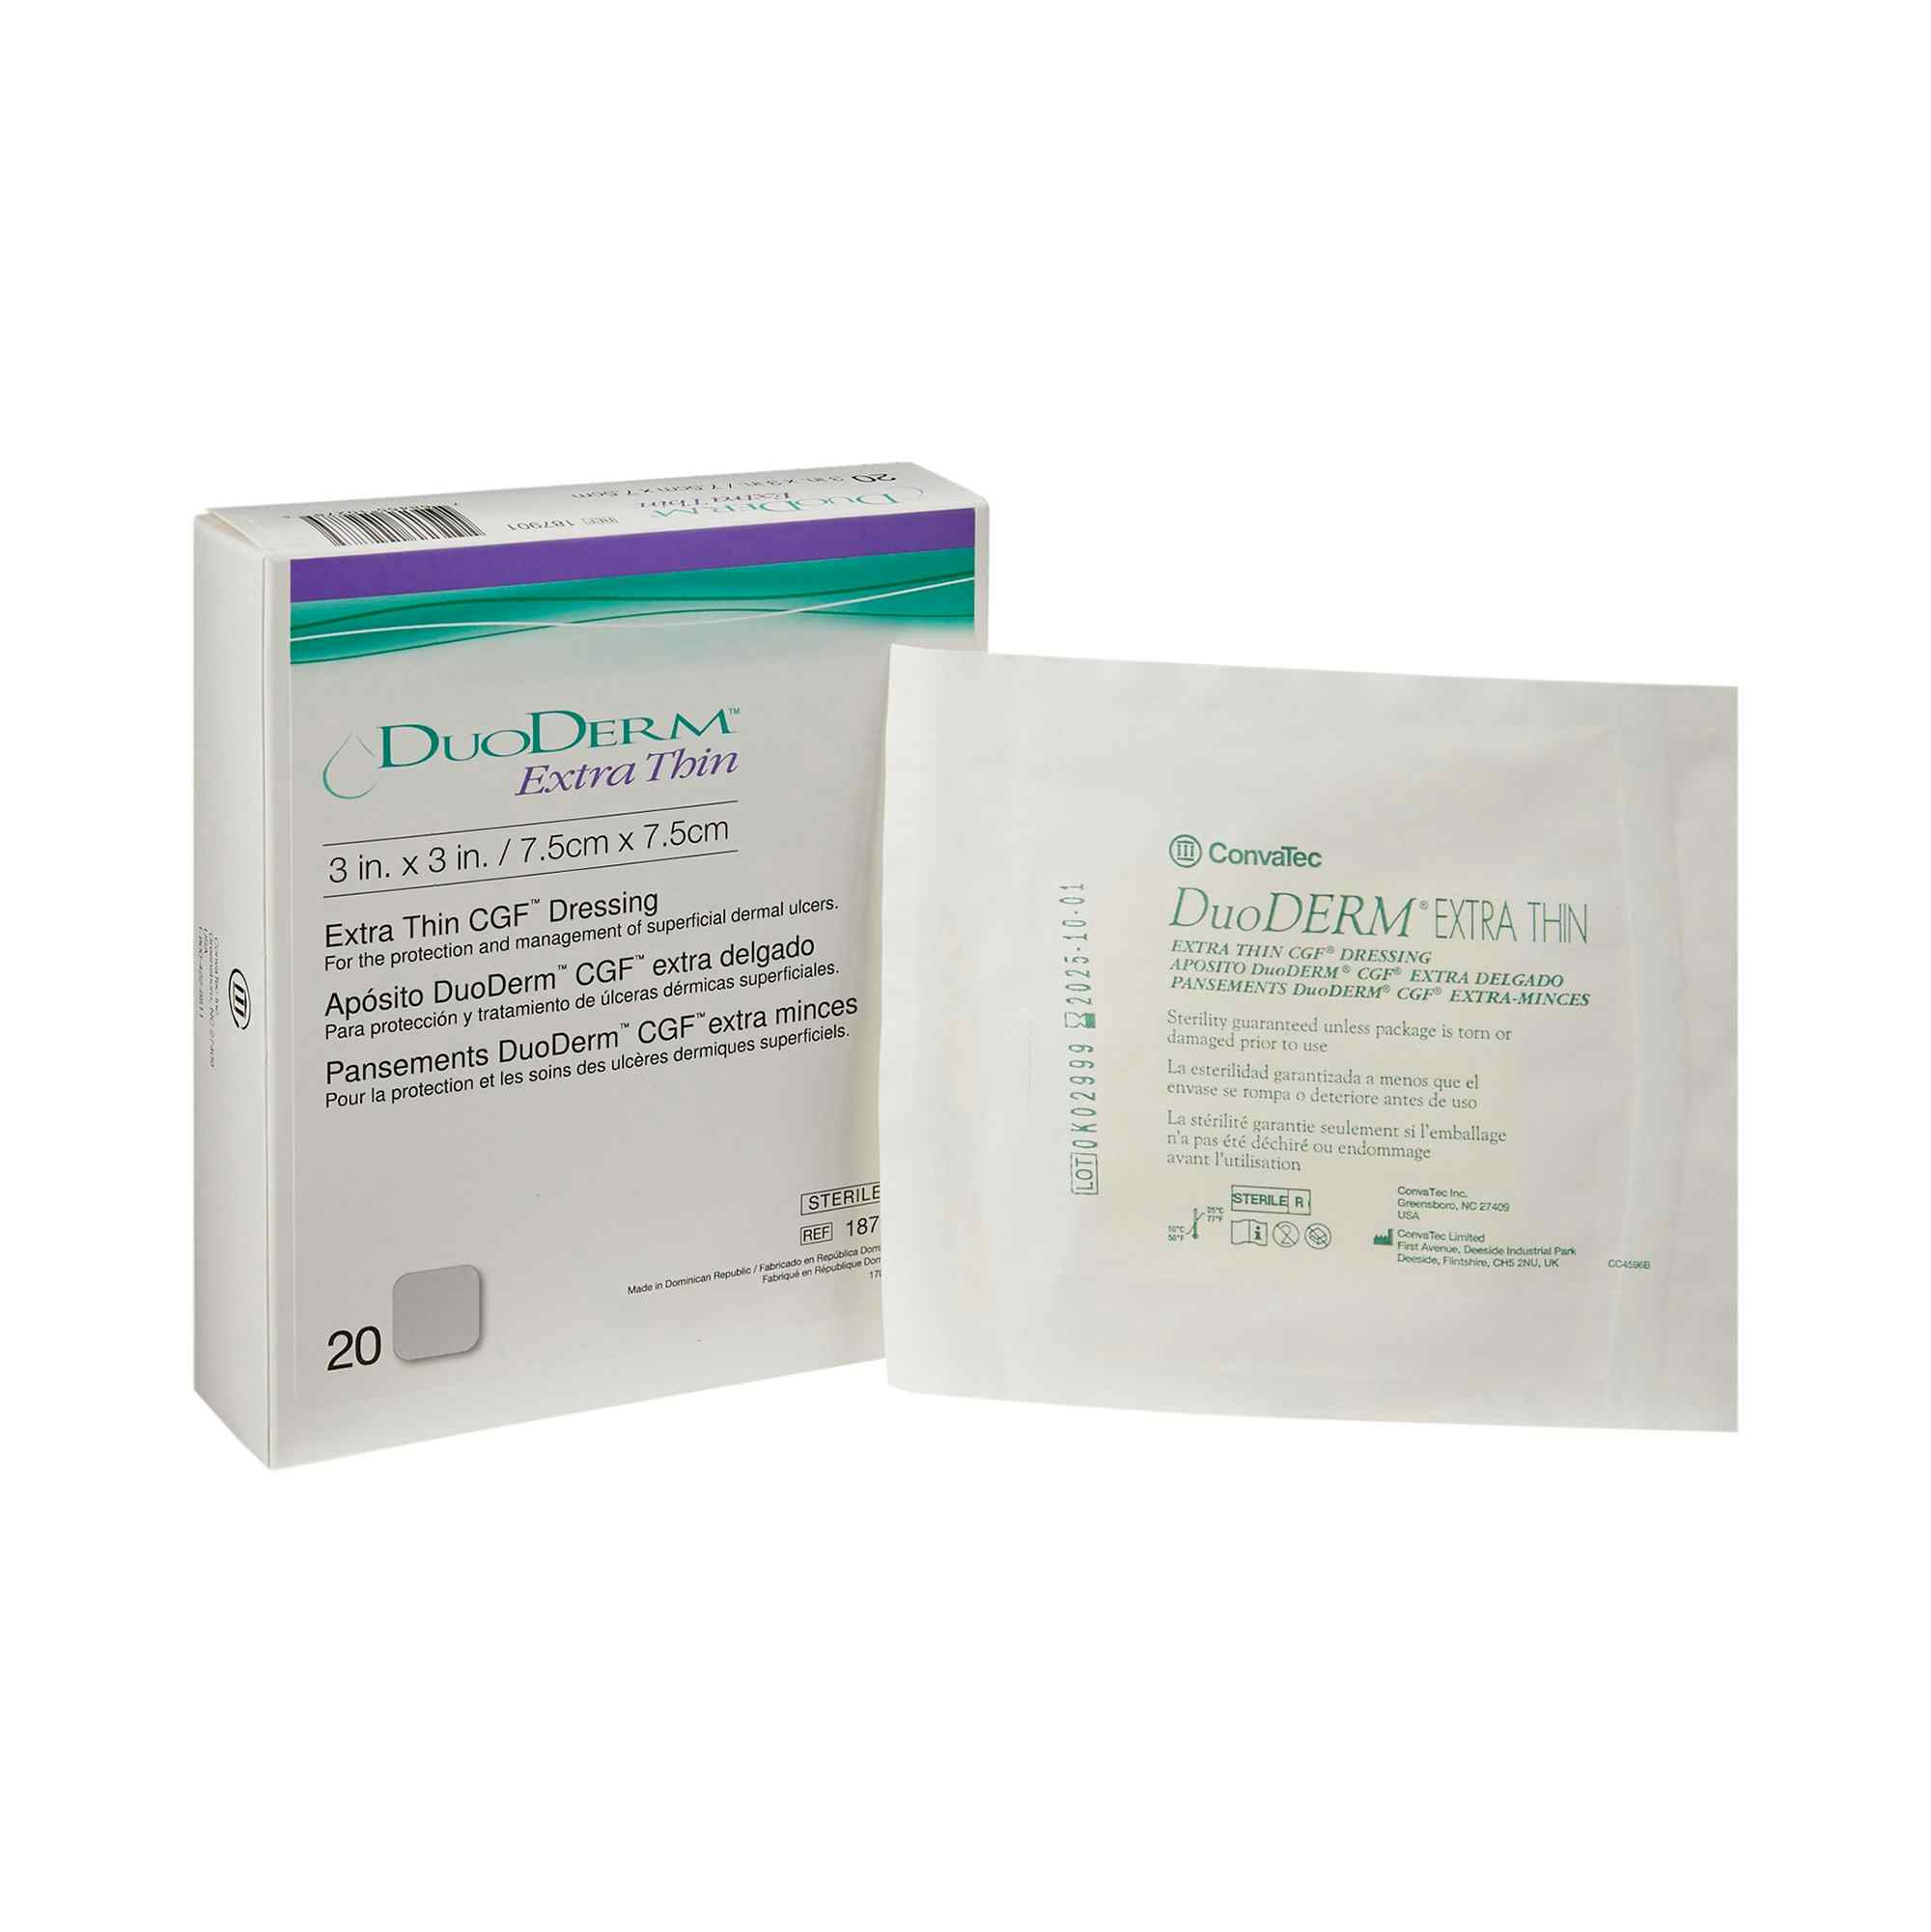 DuoDERM Extra Thin Hydrocolloid Dressing, 3" X 3", Square Sterile, 187901, Box of 20